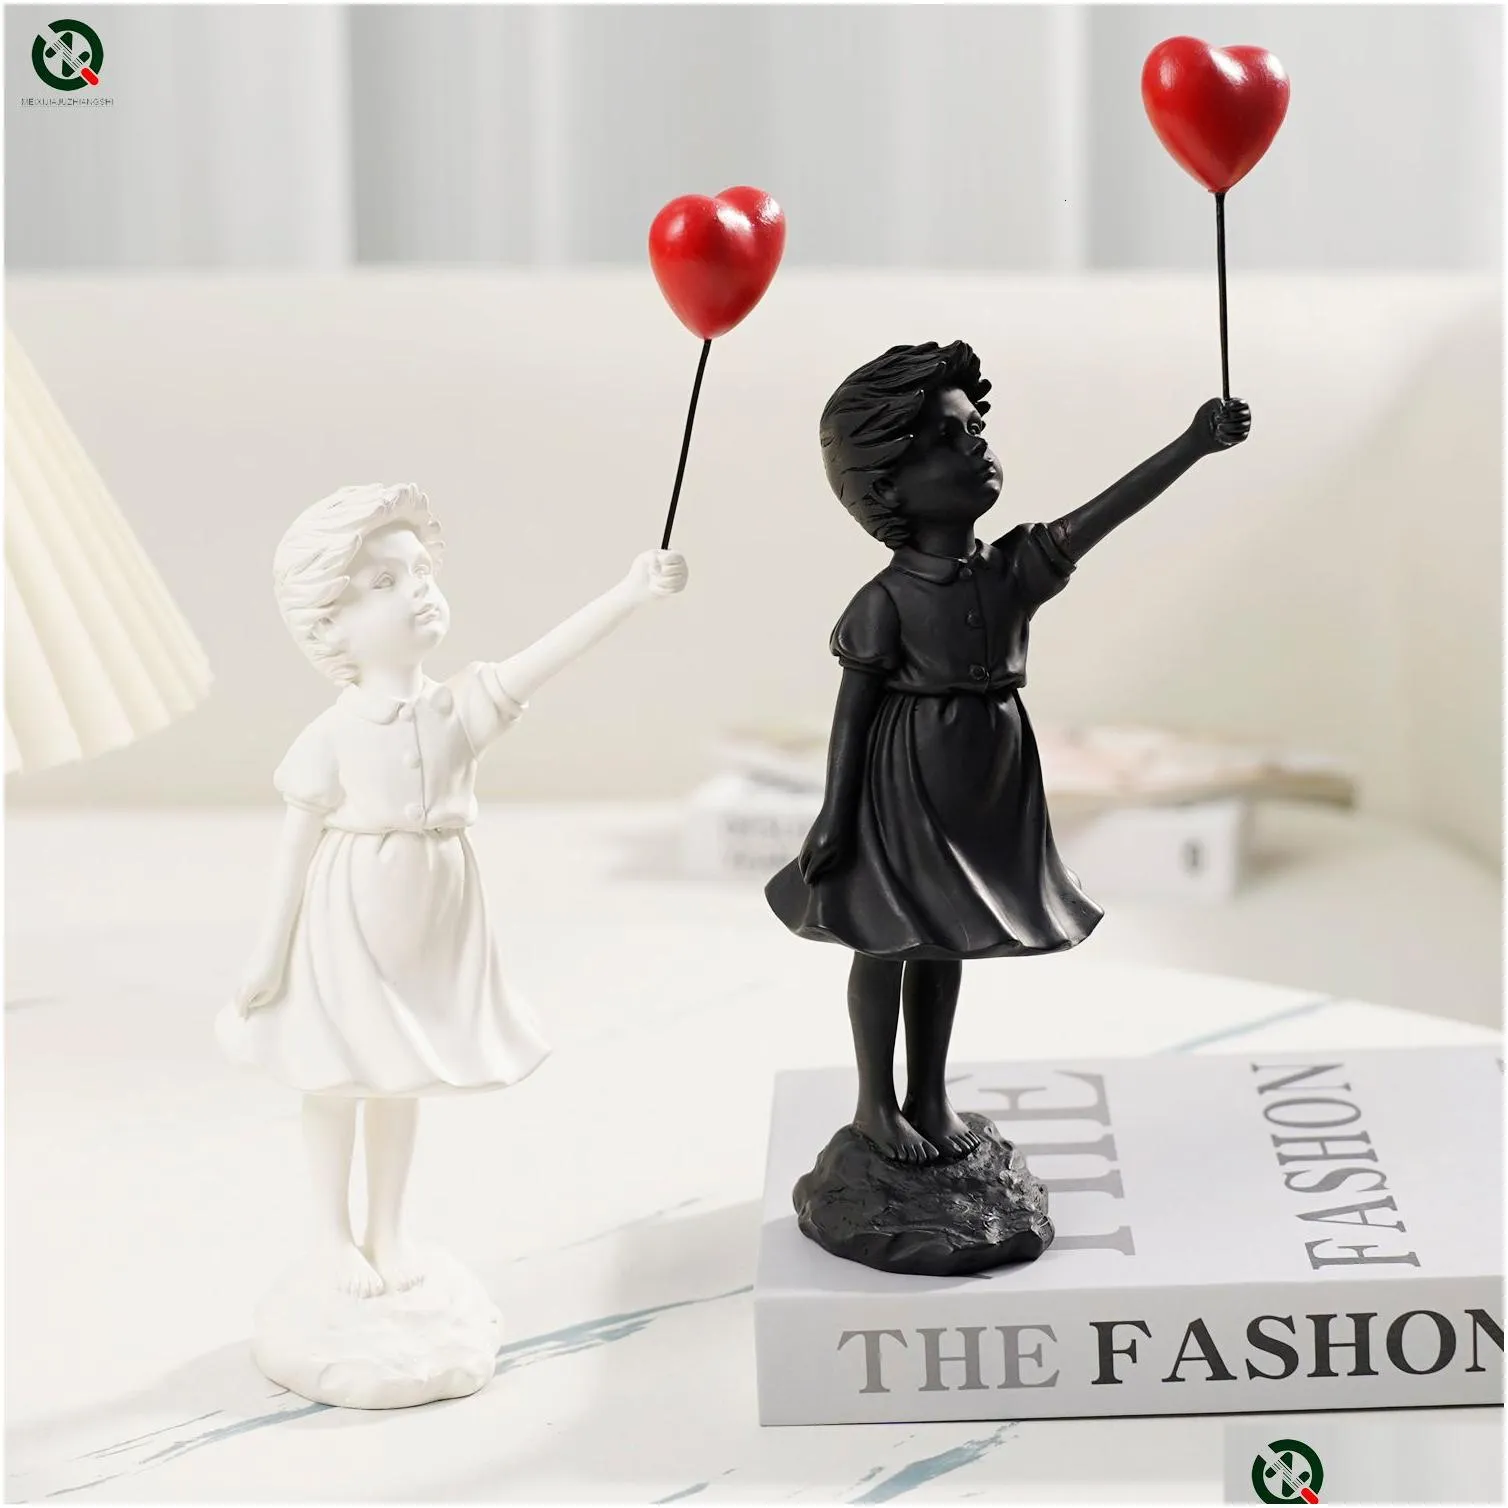 decorative objects figurines flying balloon girl figurine banksy home decor modern art sculpture resin figure craft ornament collectible statue